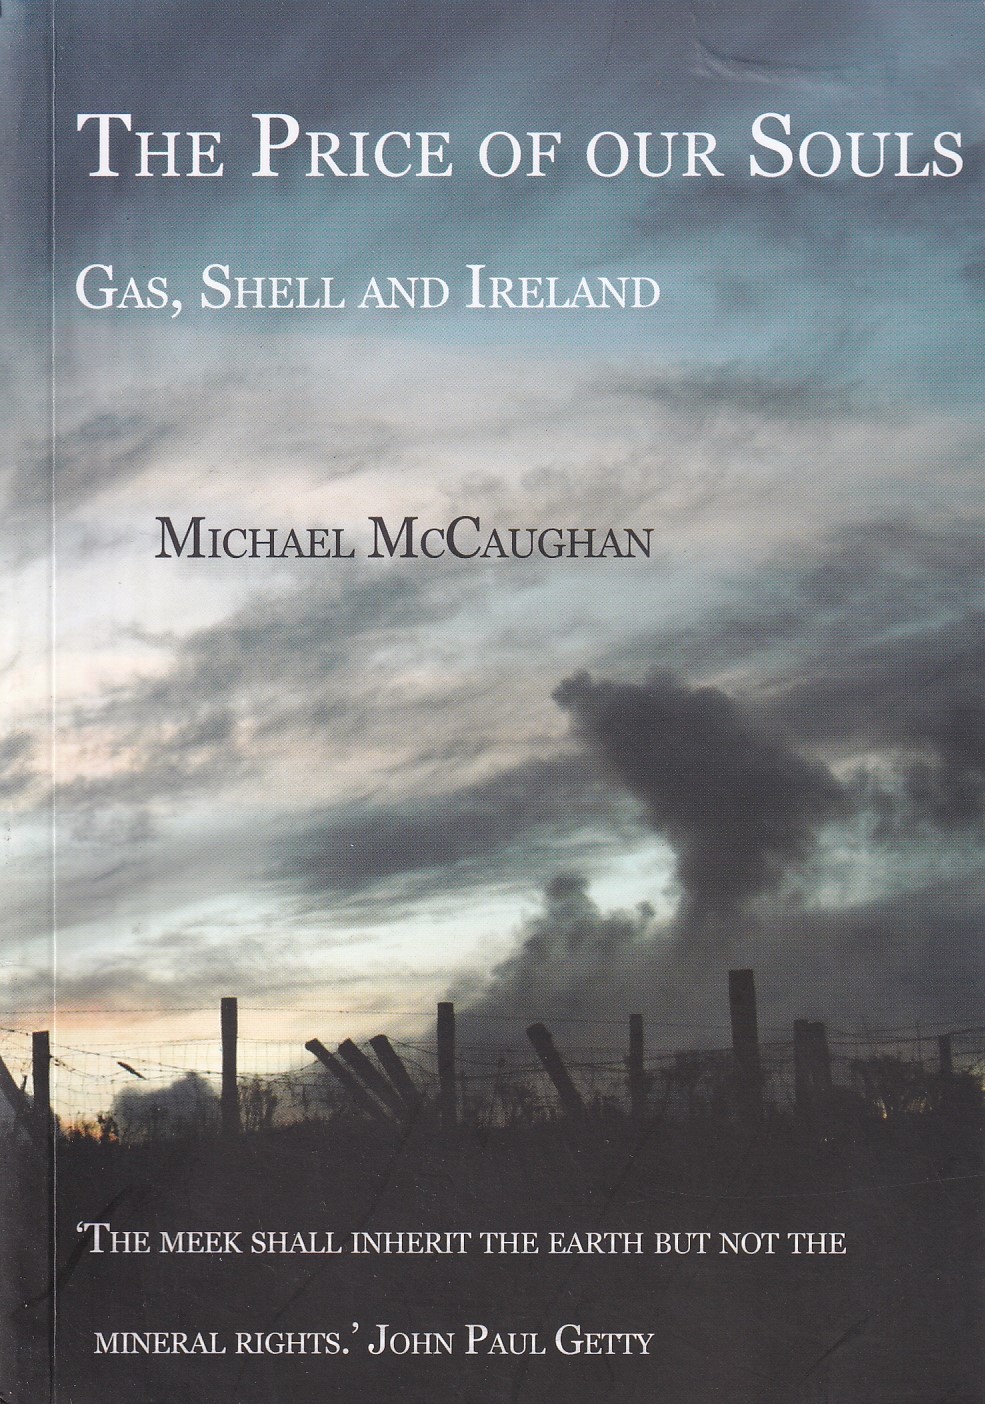 The Price of our Souls: Gas, Shell and Ireland | Michael McCaughan | Charlie Byrne's